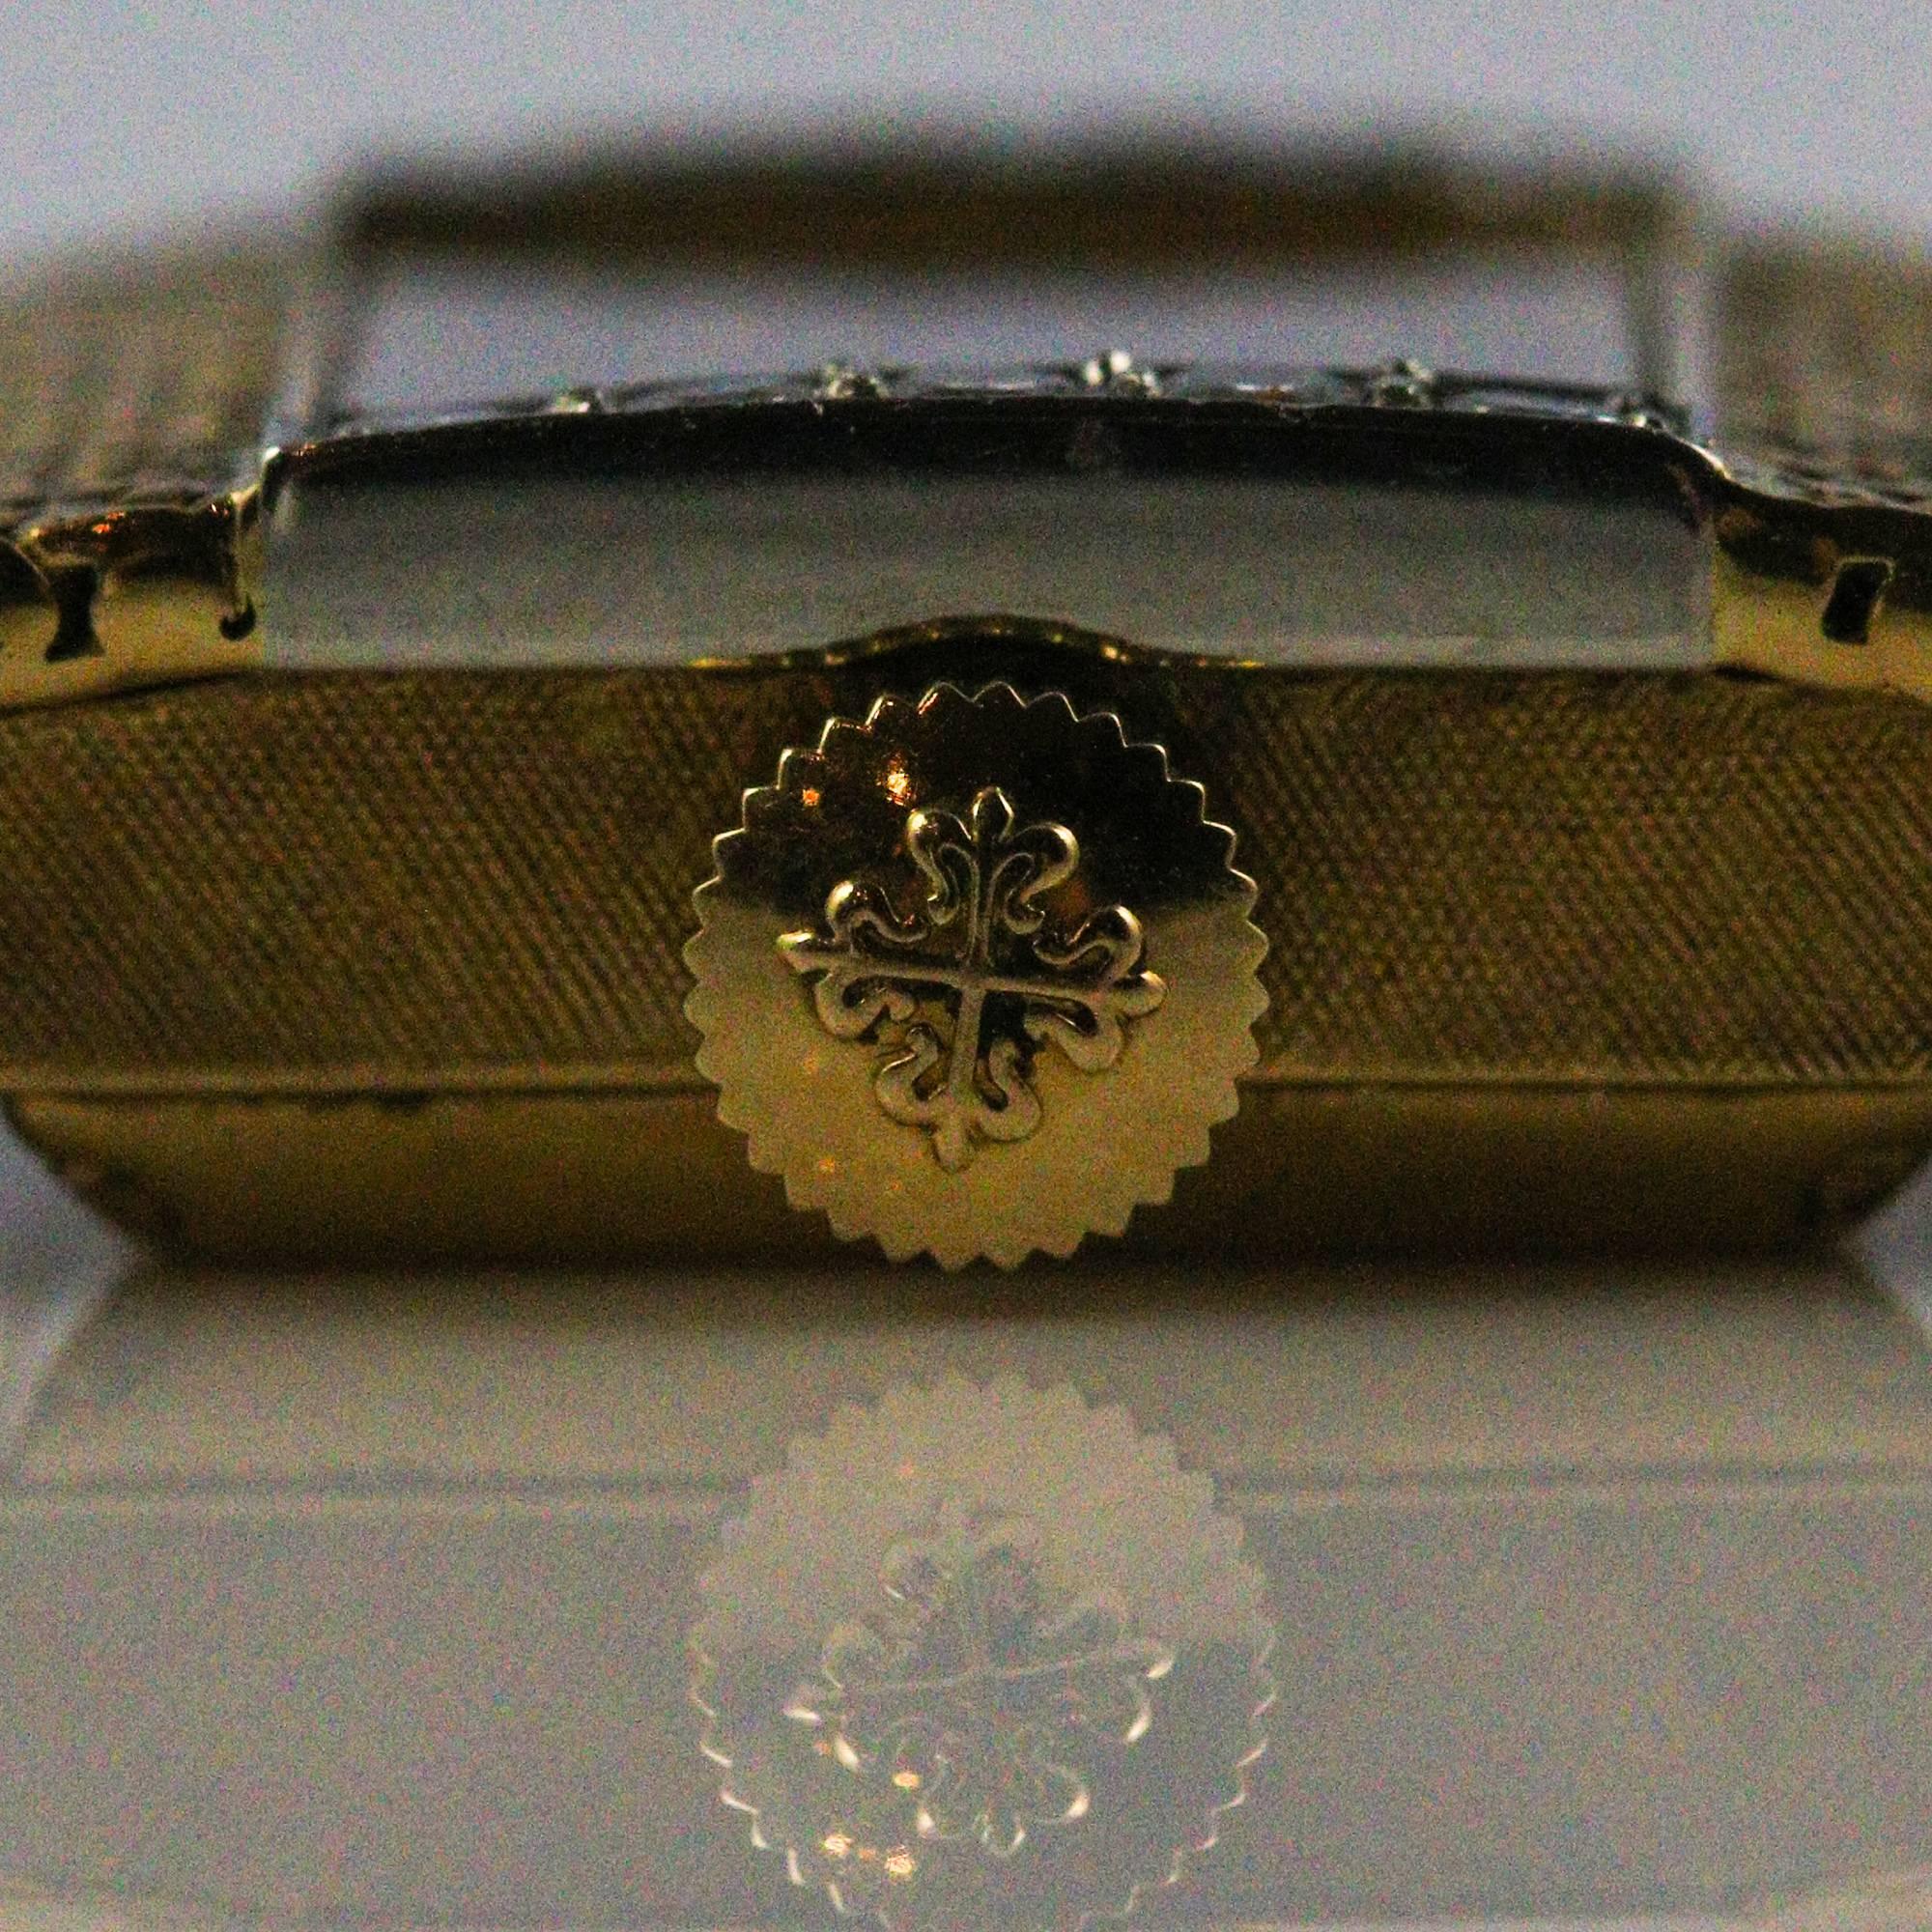 This beautiful yellow gold watch is made in a collaboration between Patek Philippe and Tiffany & Co. The case and band are 18k yellow gold with a white face and 8 round diamonds on the lining the side of the dial. The diamonds weigh an estimated